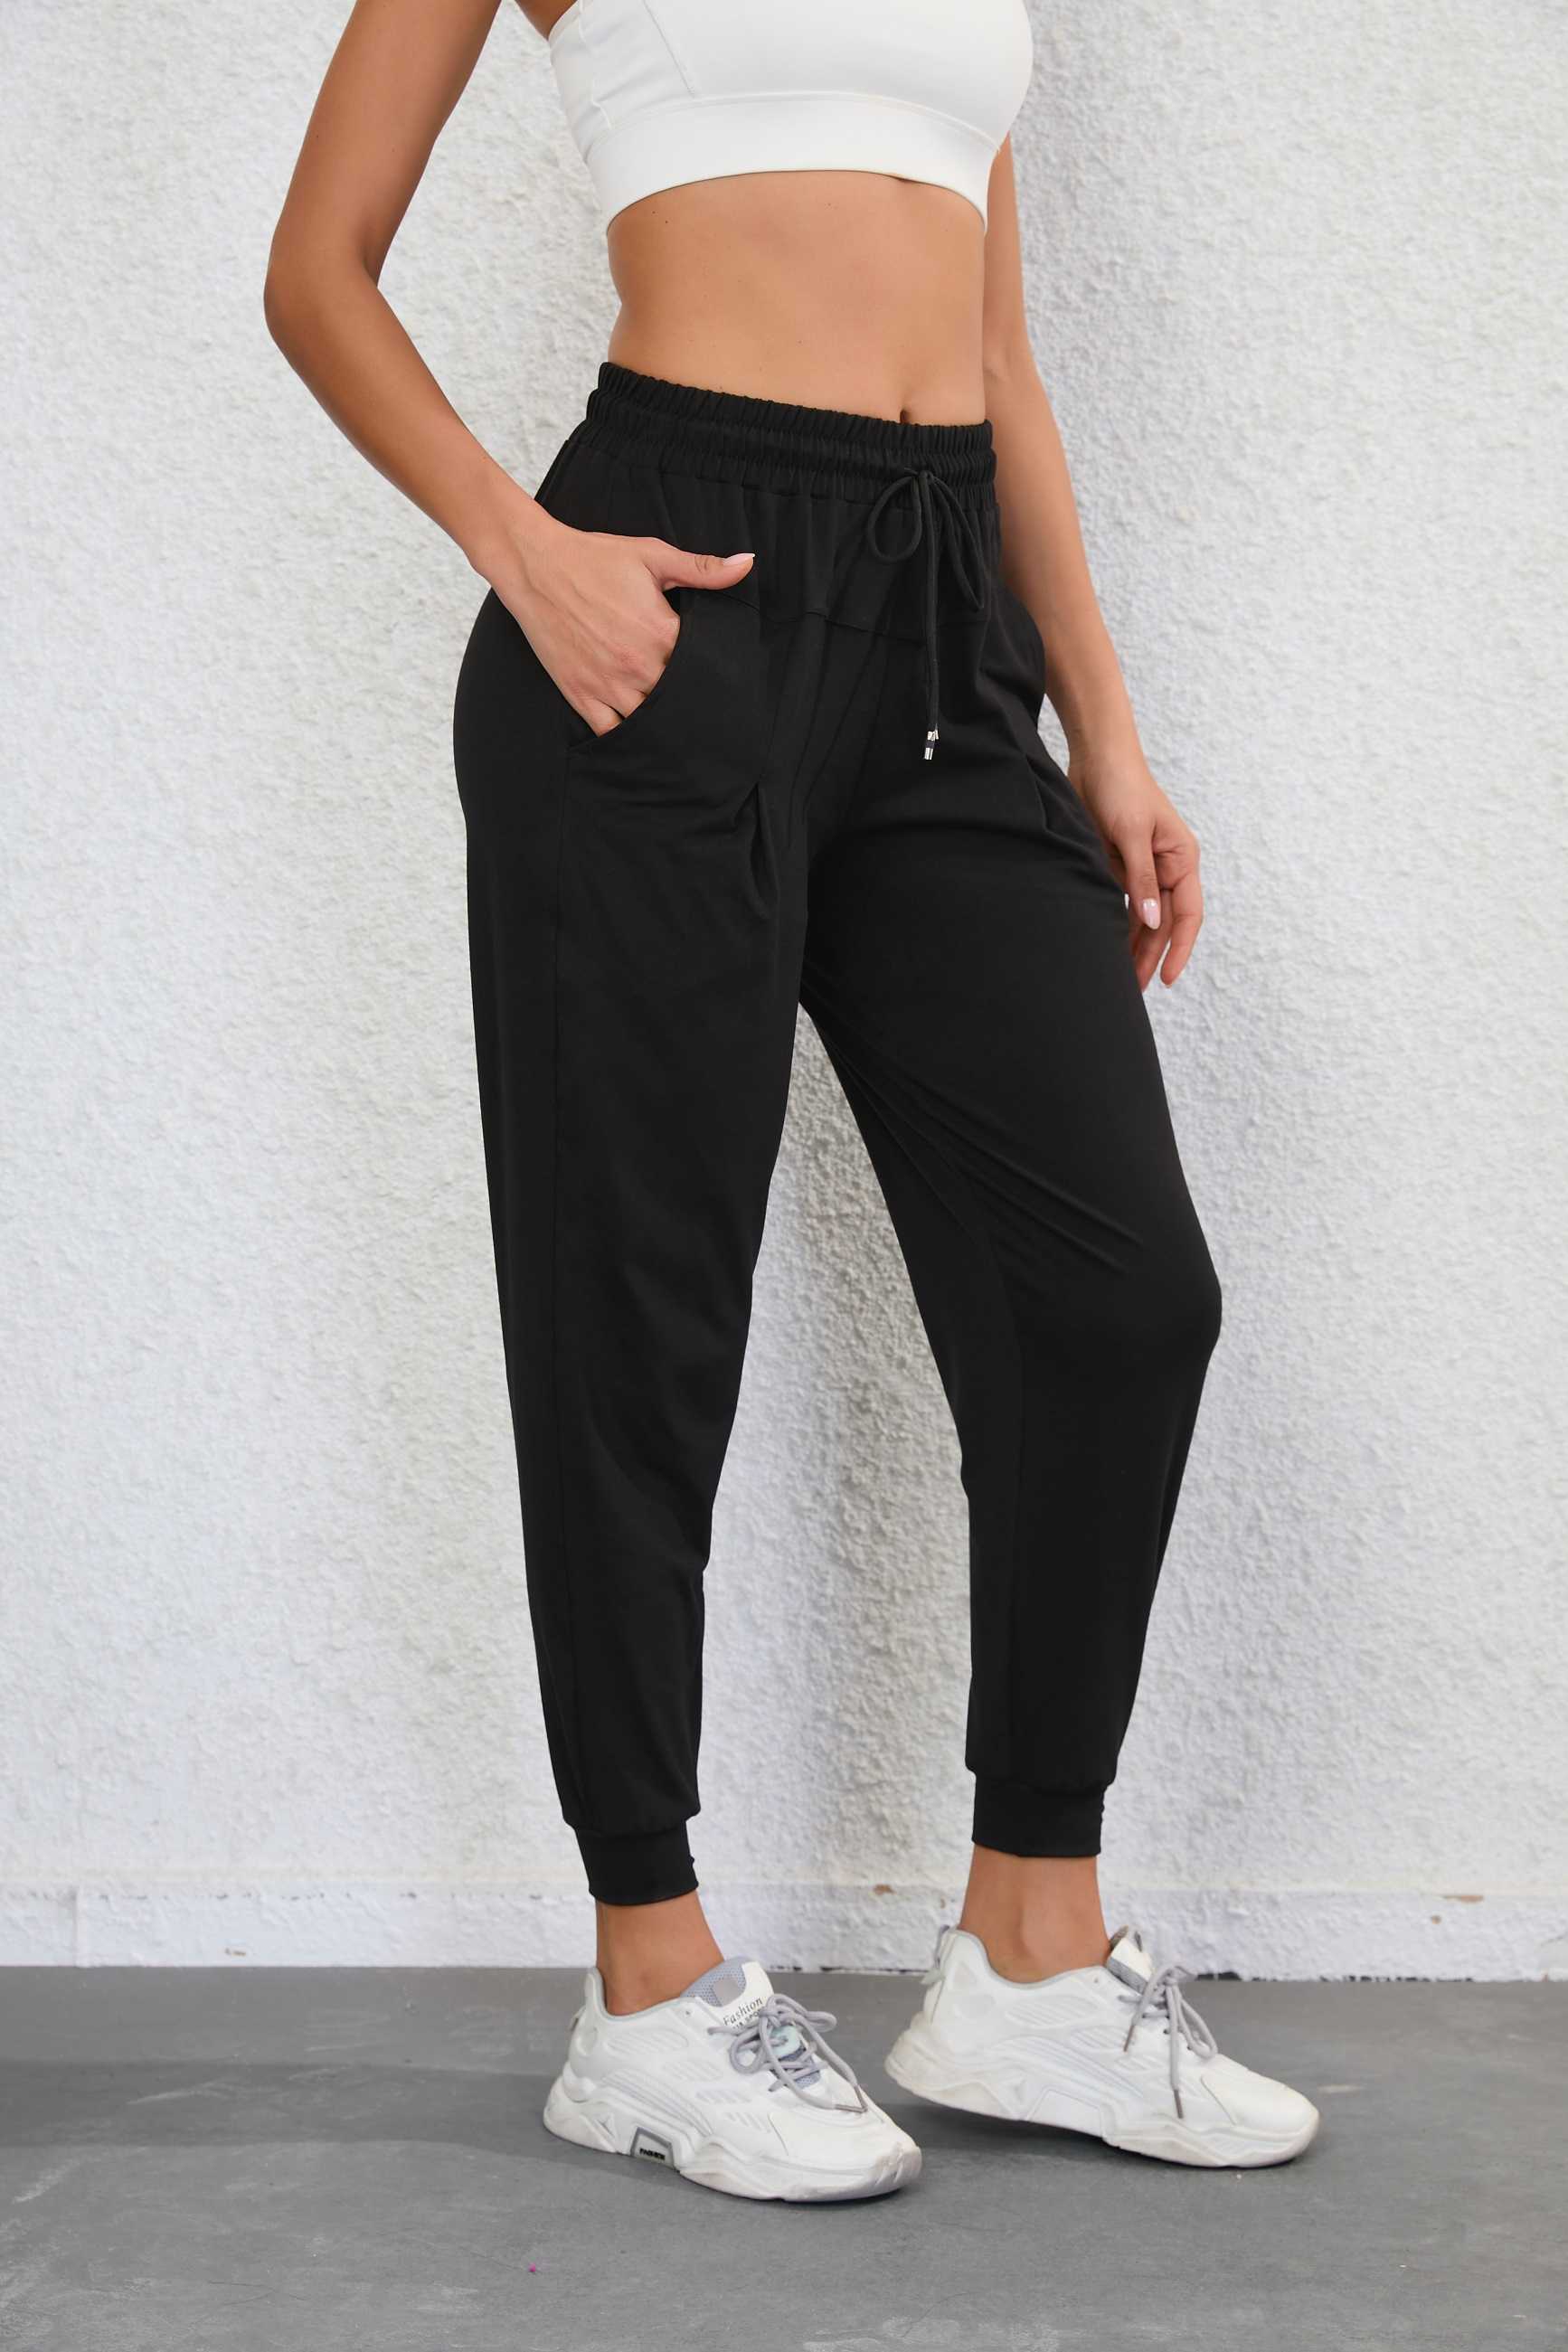 Jogger Pants for Women Casual Solid Color High Waist Lace-up Loose Pants  Ladies Workout Out Trousers Athletic Pants 